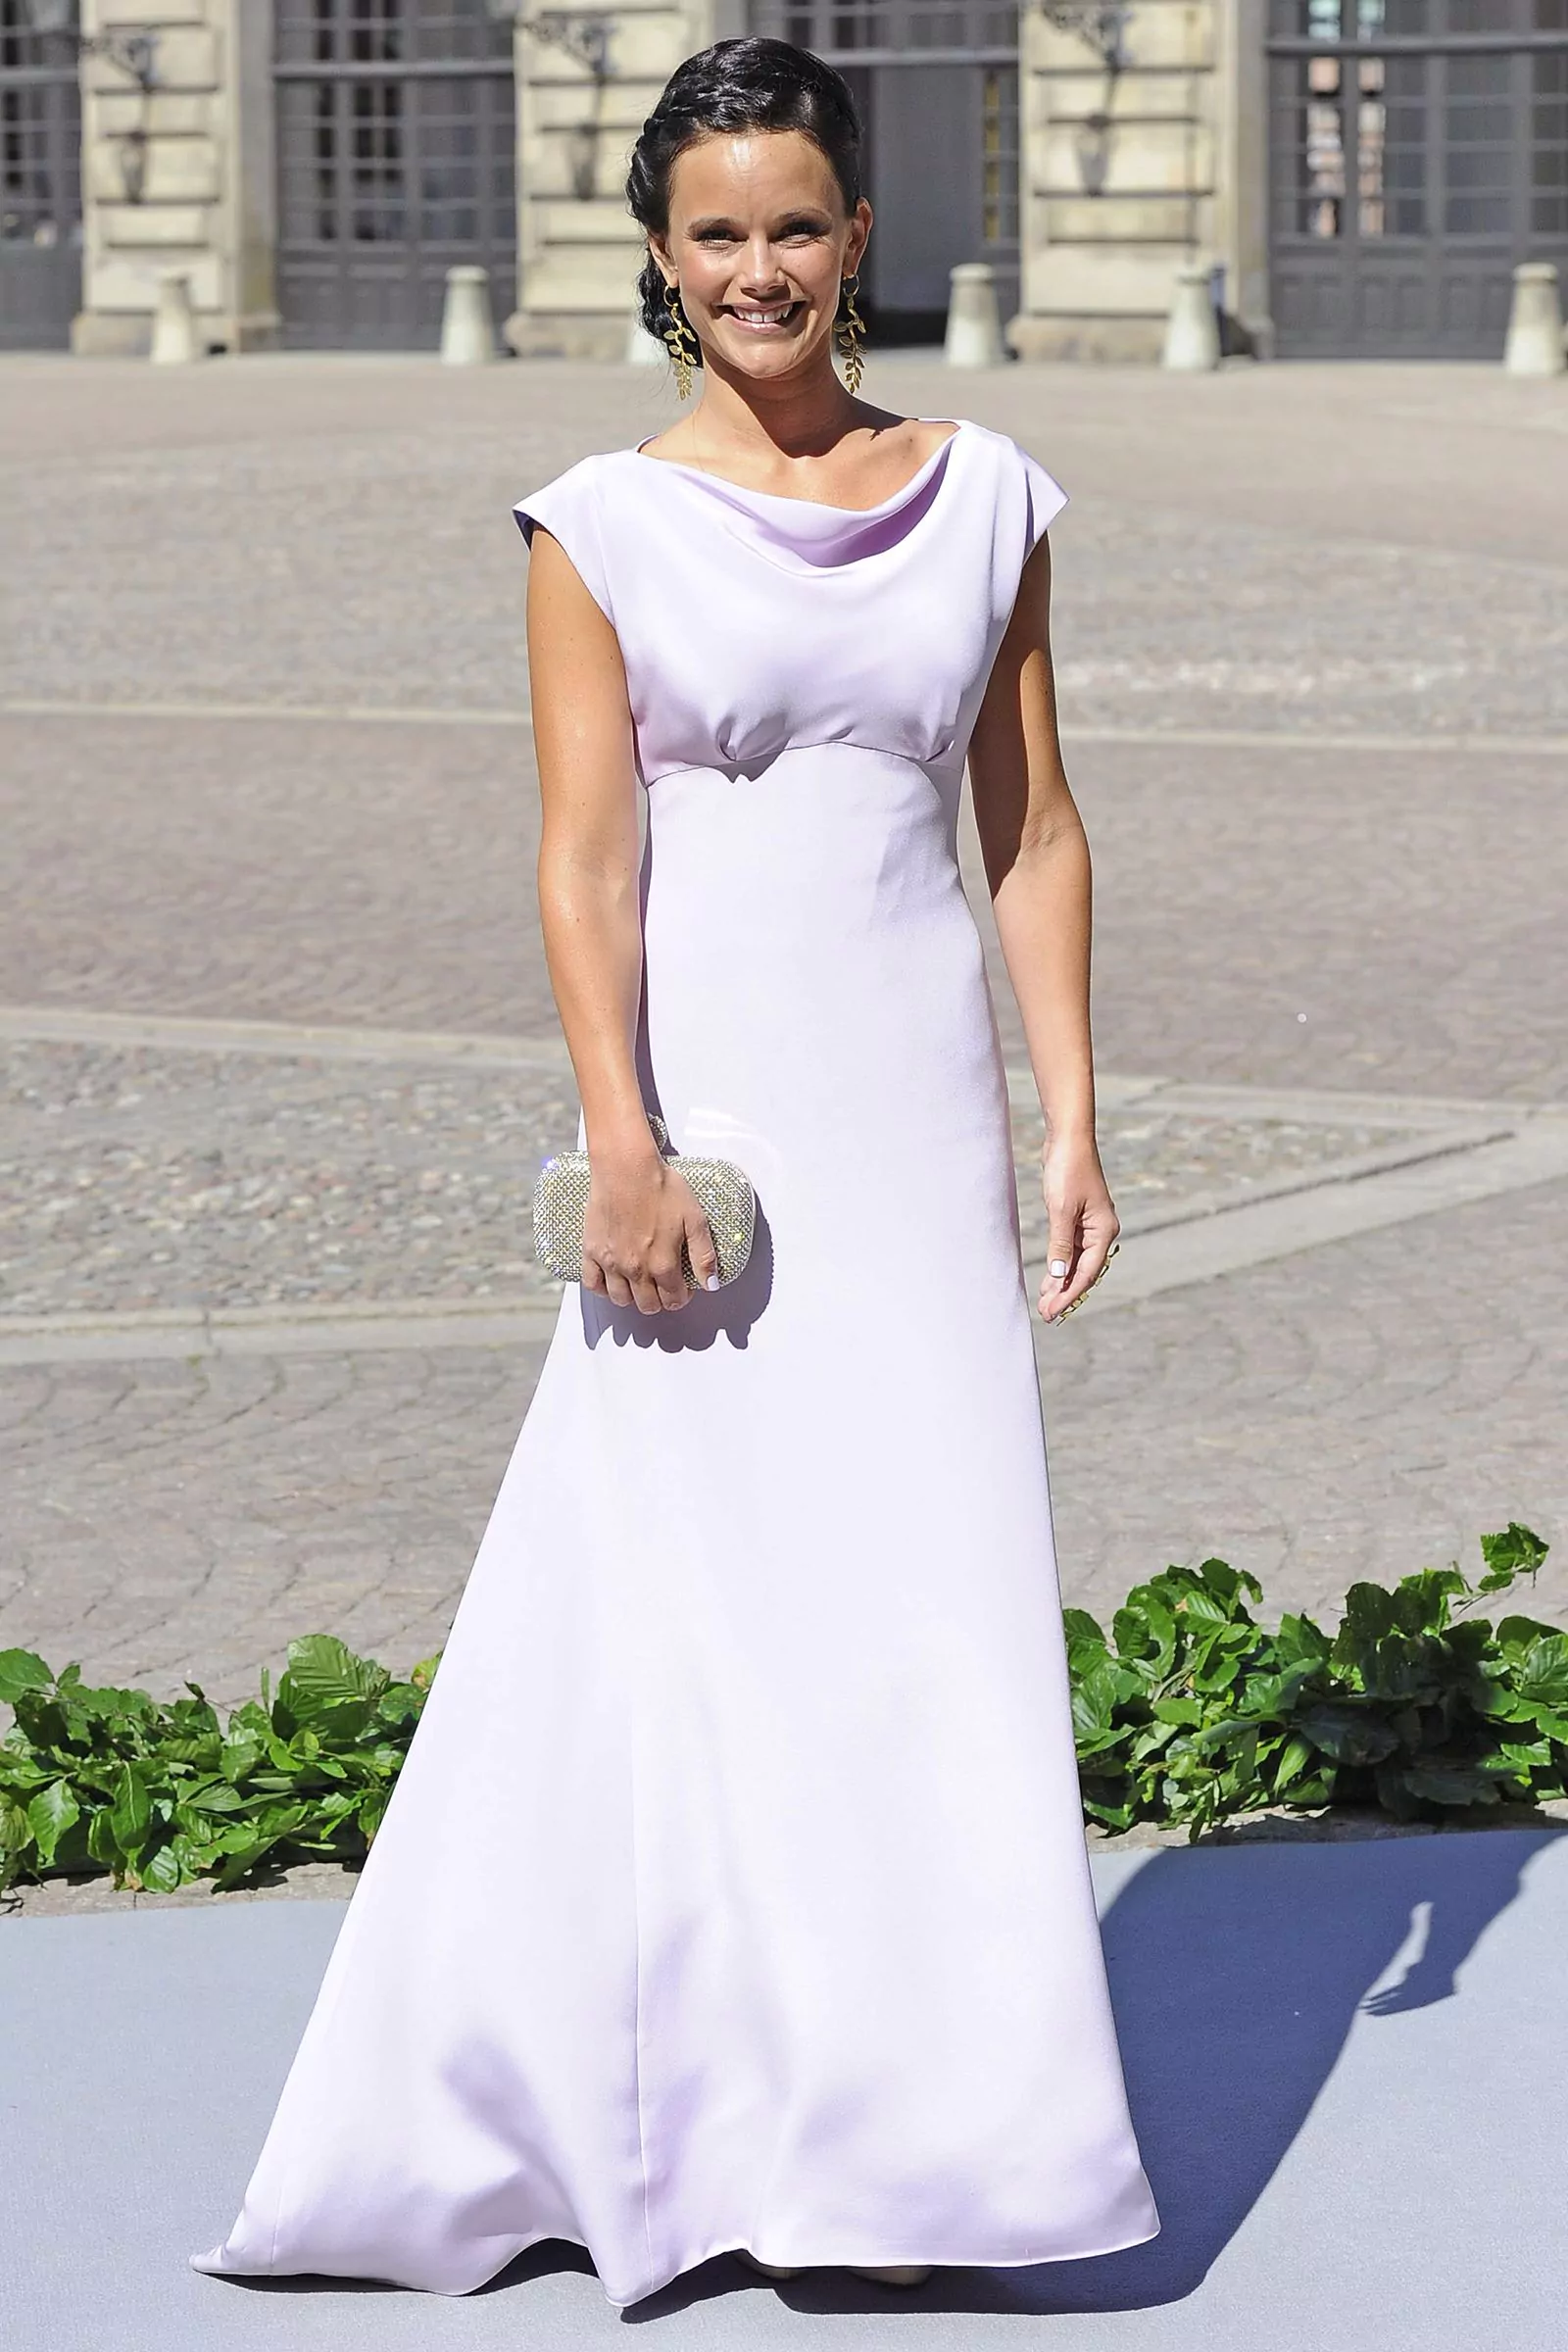 Sofia Hellqvist at the wedding of Princess Madeleine of Sweden and Christopher O'Neill at the Royal Palace in Stockholm, June 8, 2013.